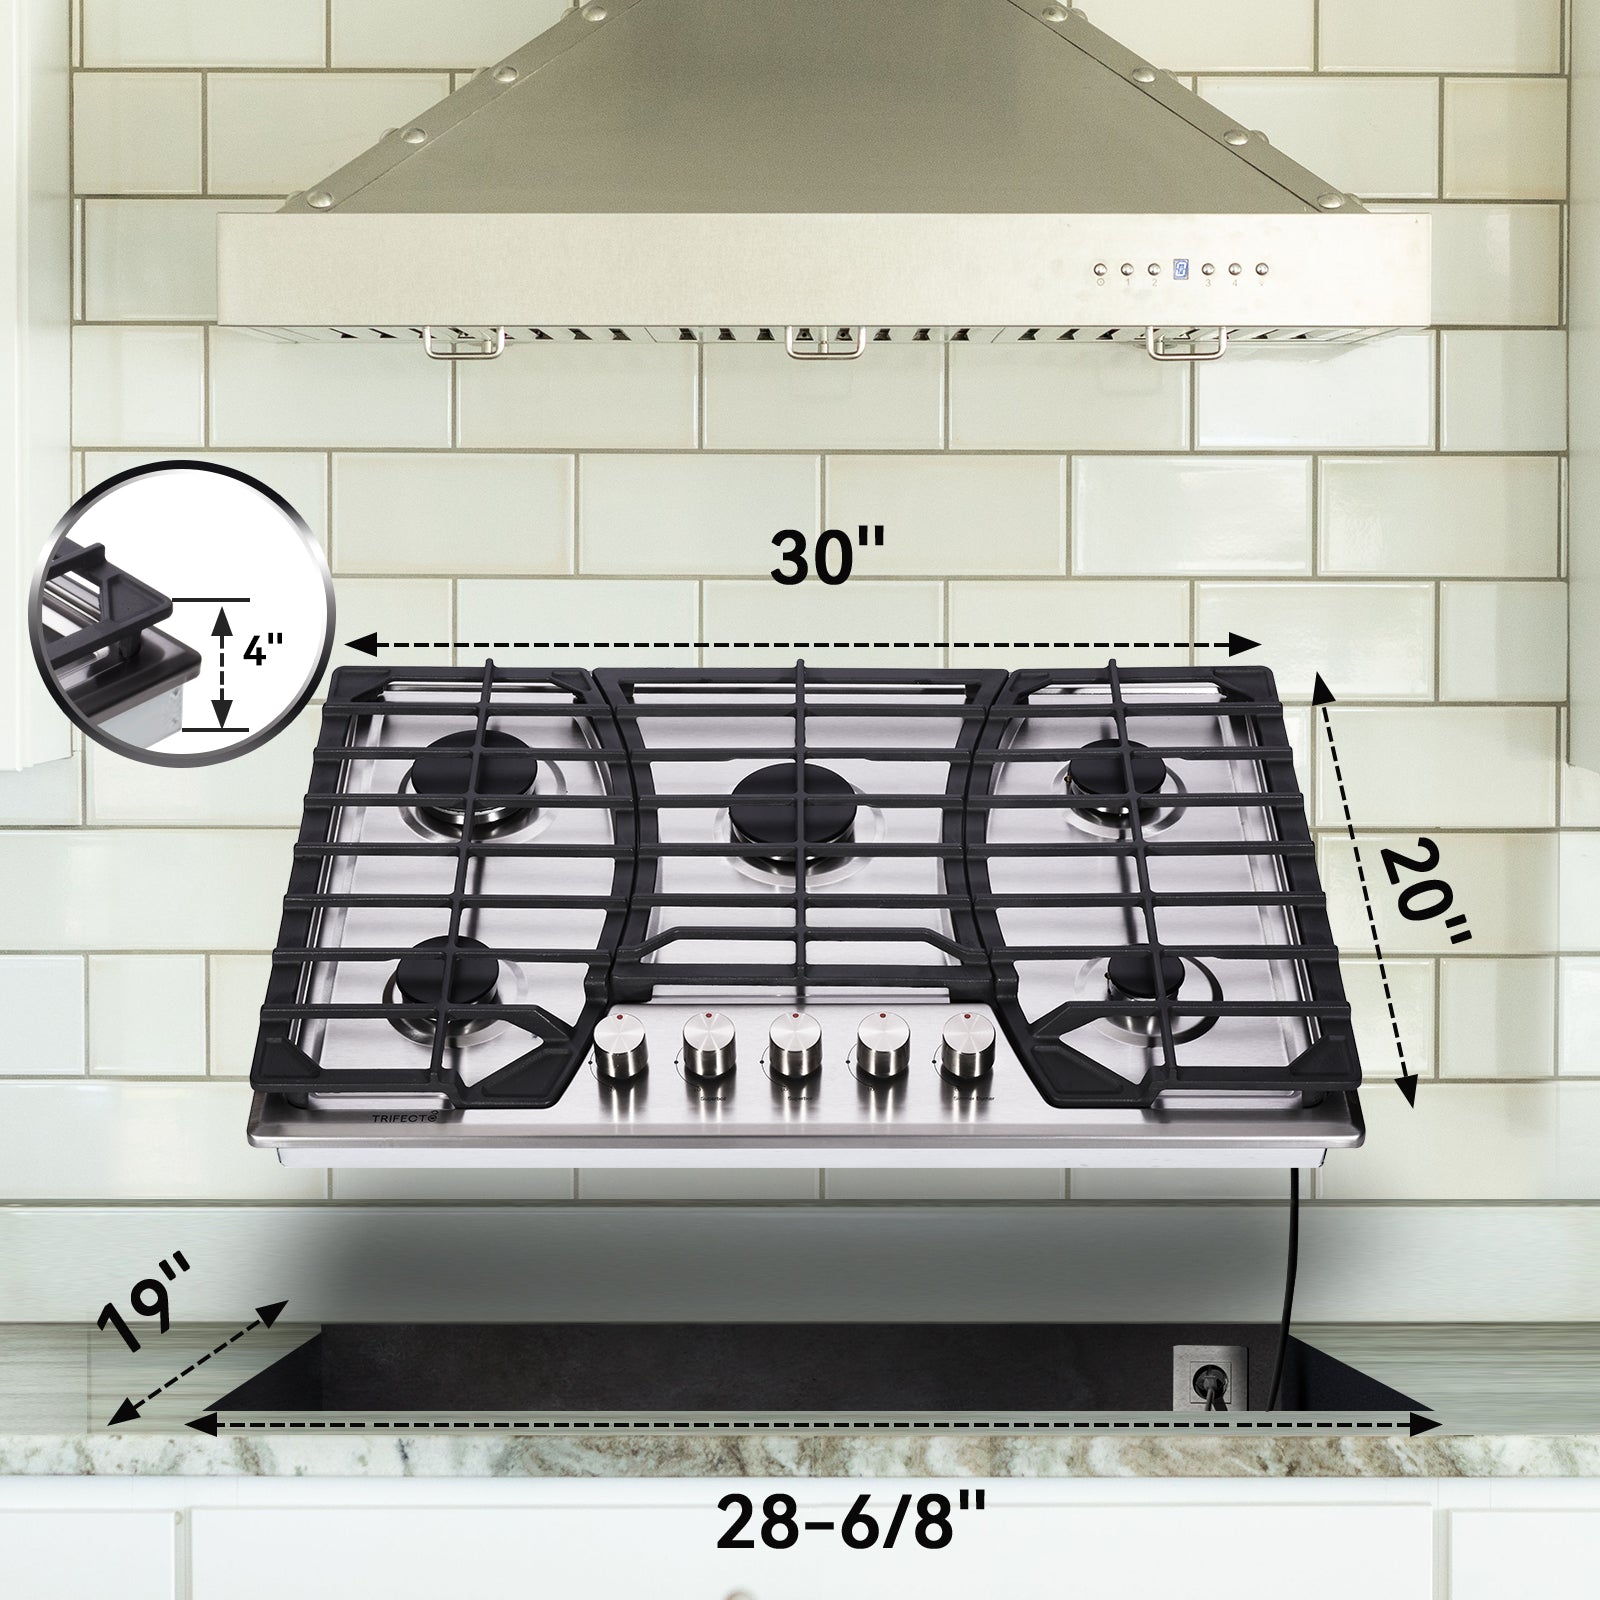 BLOW HOT HARBOUR 4S PLUS (BLACK) GAS HOB at Rs 17000 | Gas Hob in Bengaluru  | ID: 2852171255912